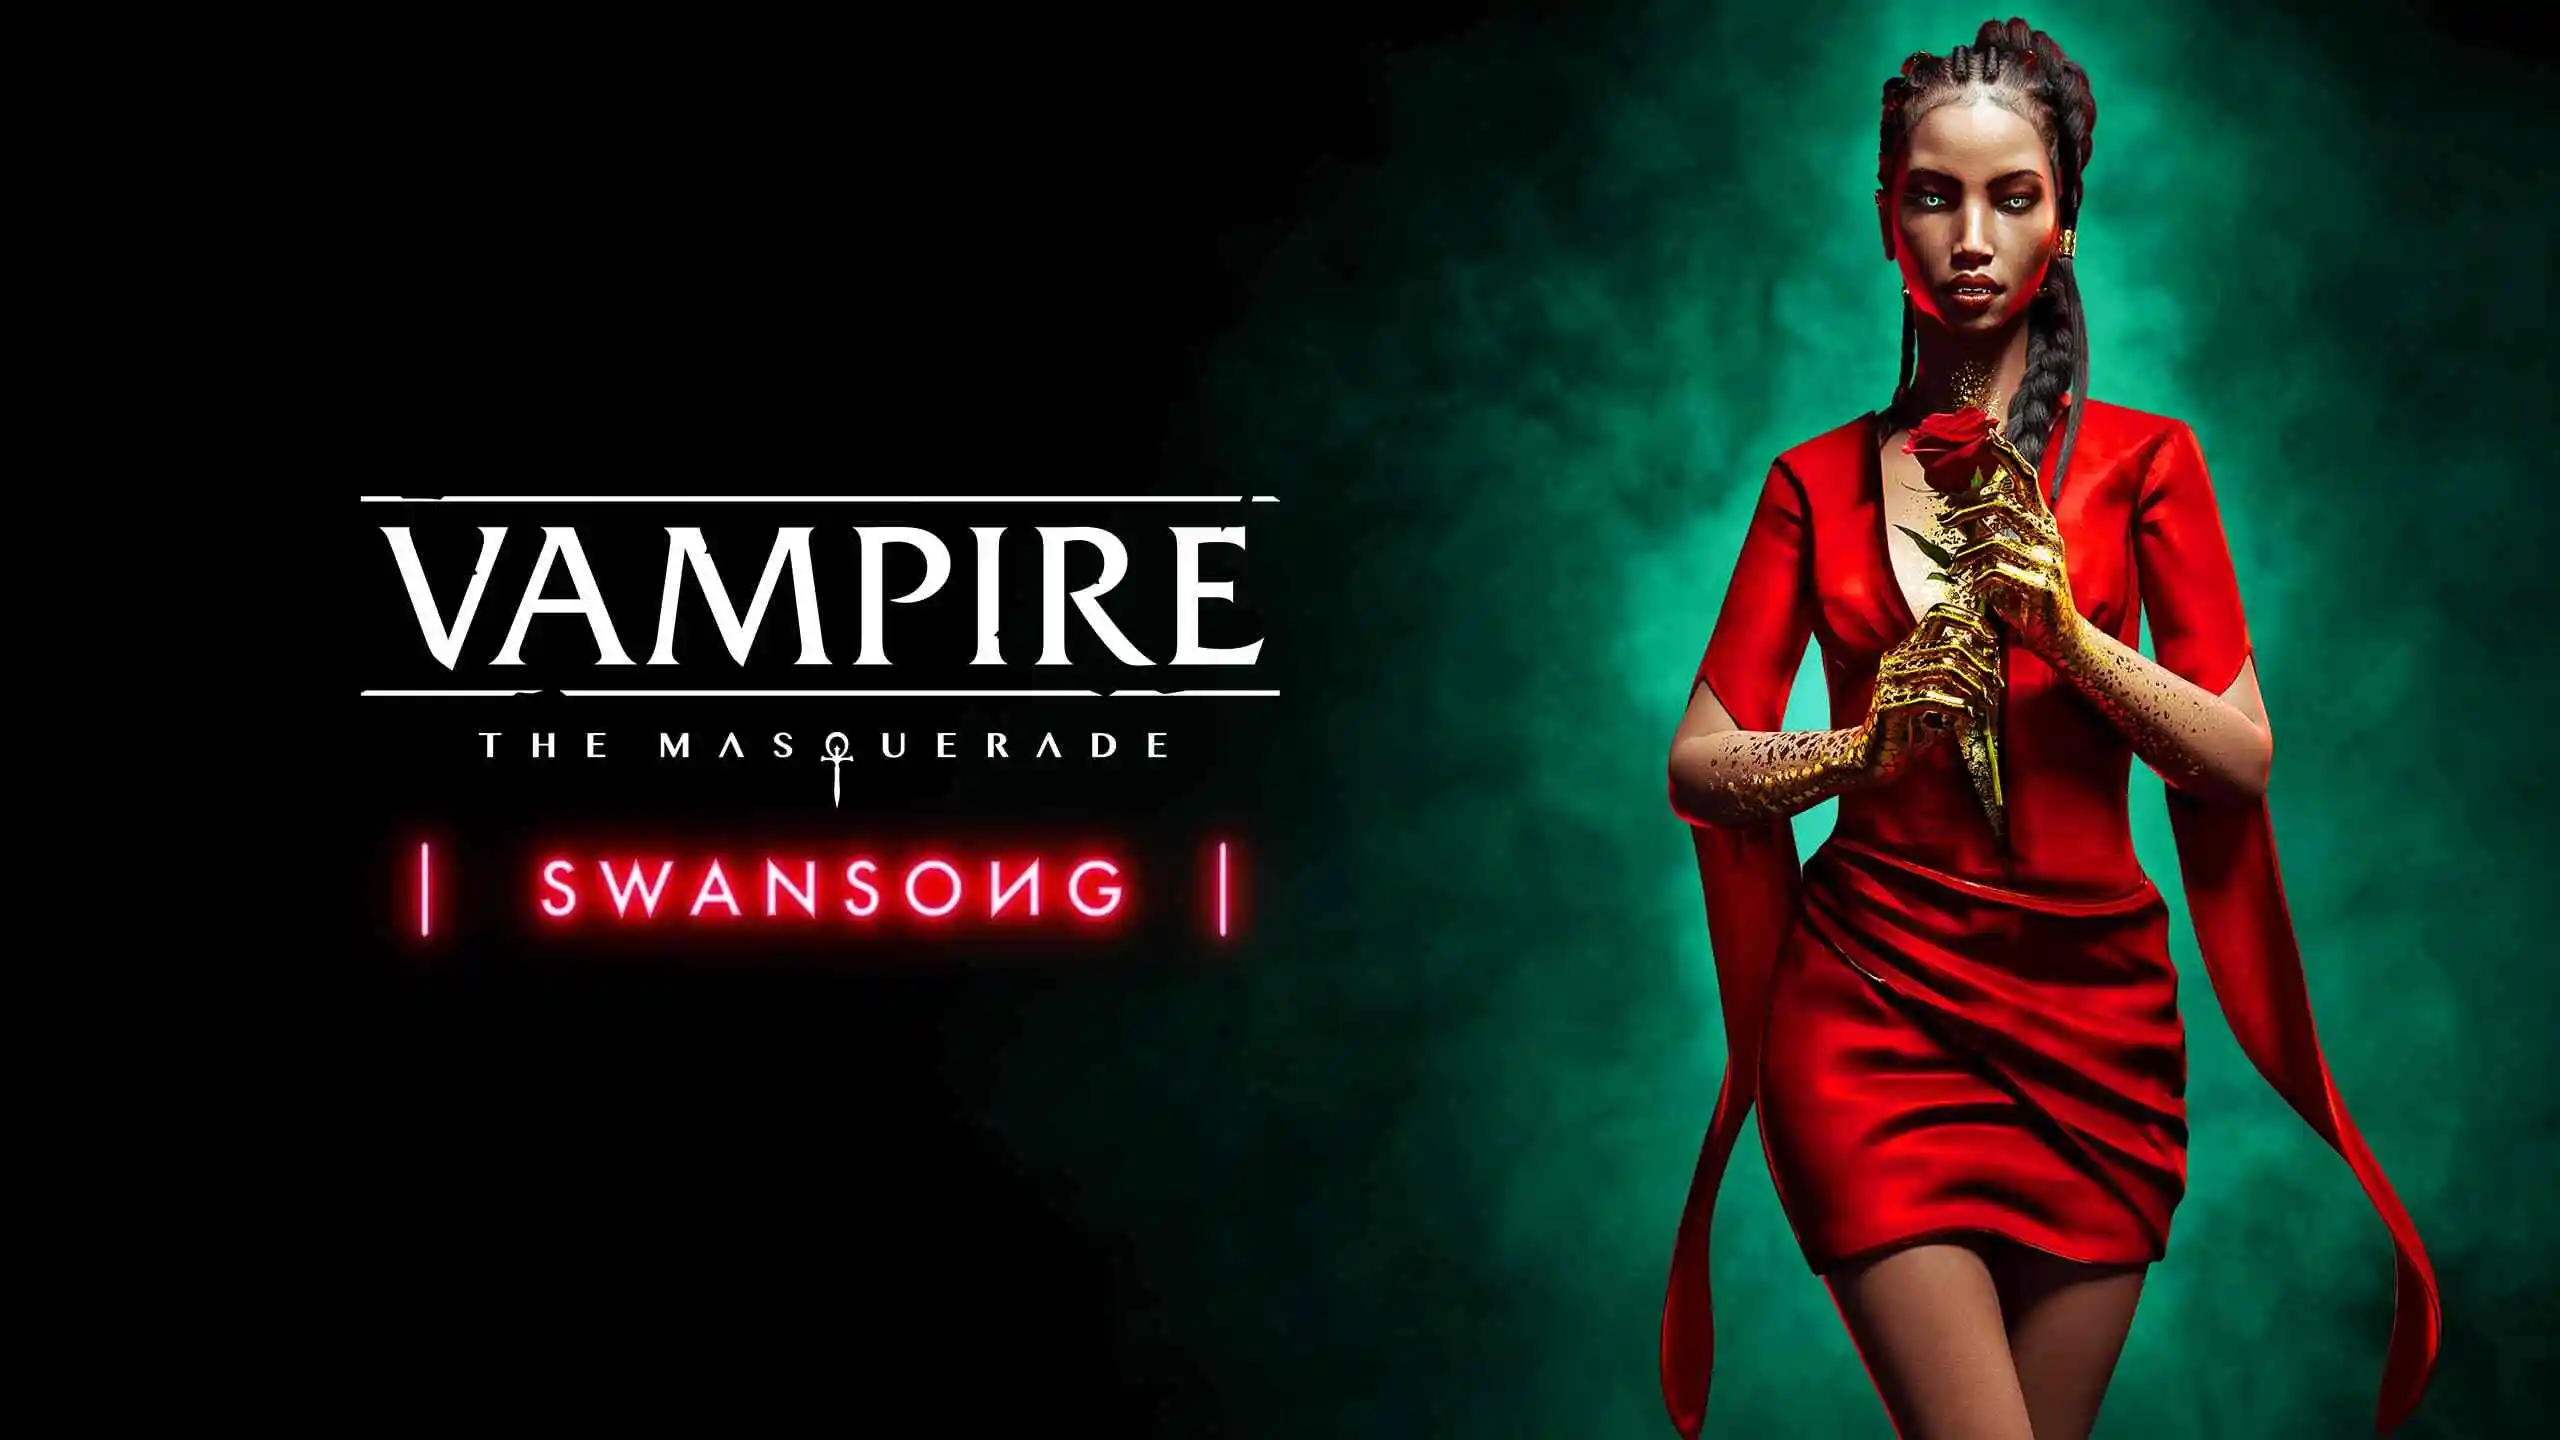 How to Buy a Gaming PC for Vampire: The Masquerade - Swansong